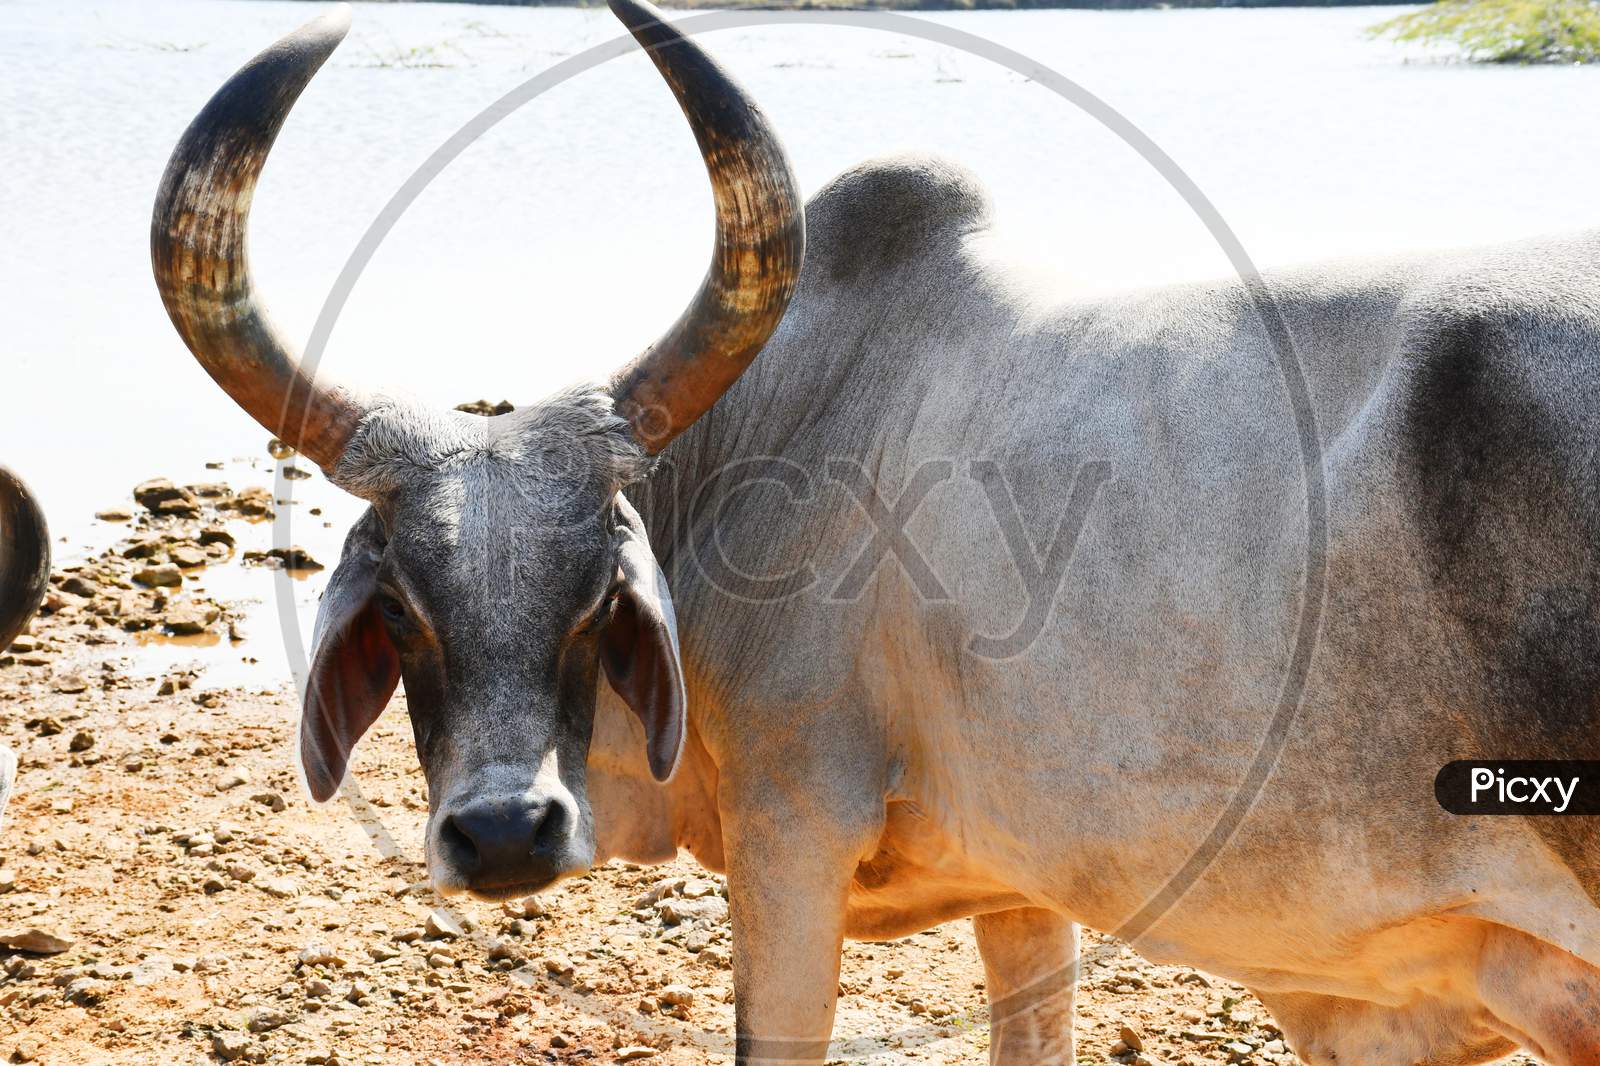 Indian Cow, Cow farming, Indian Cow group, Animal Group, Buffalo